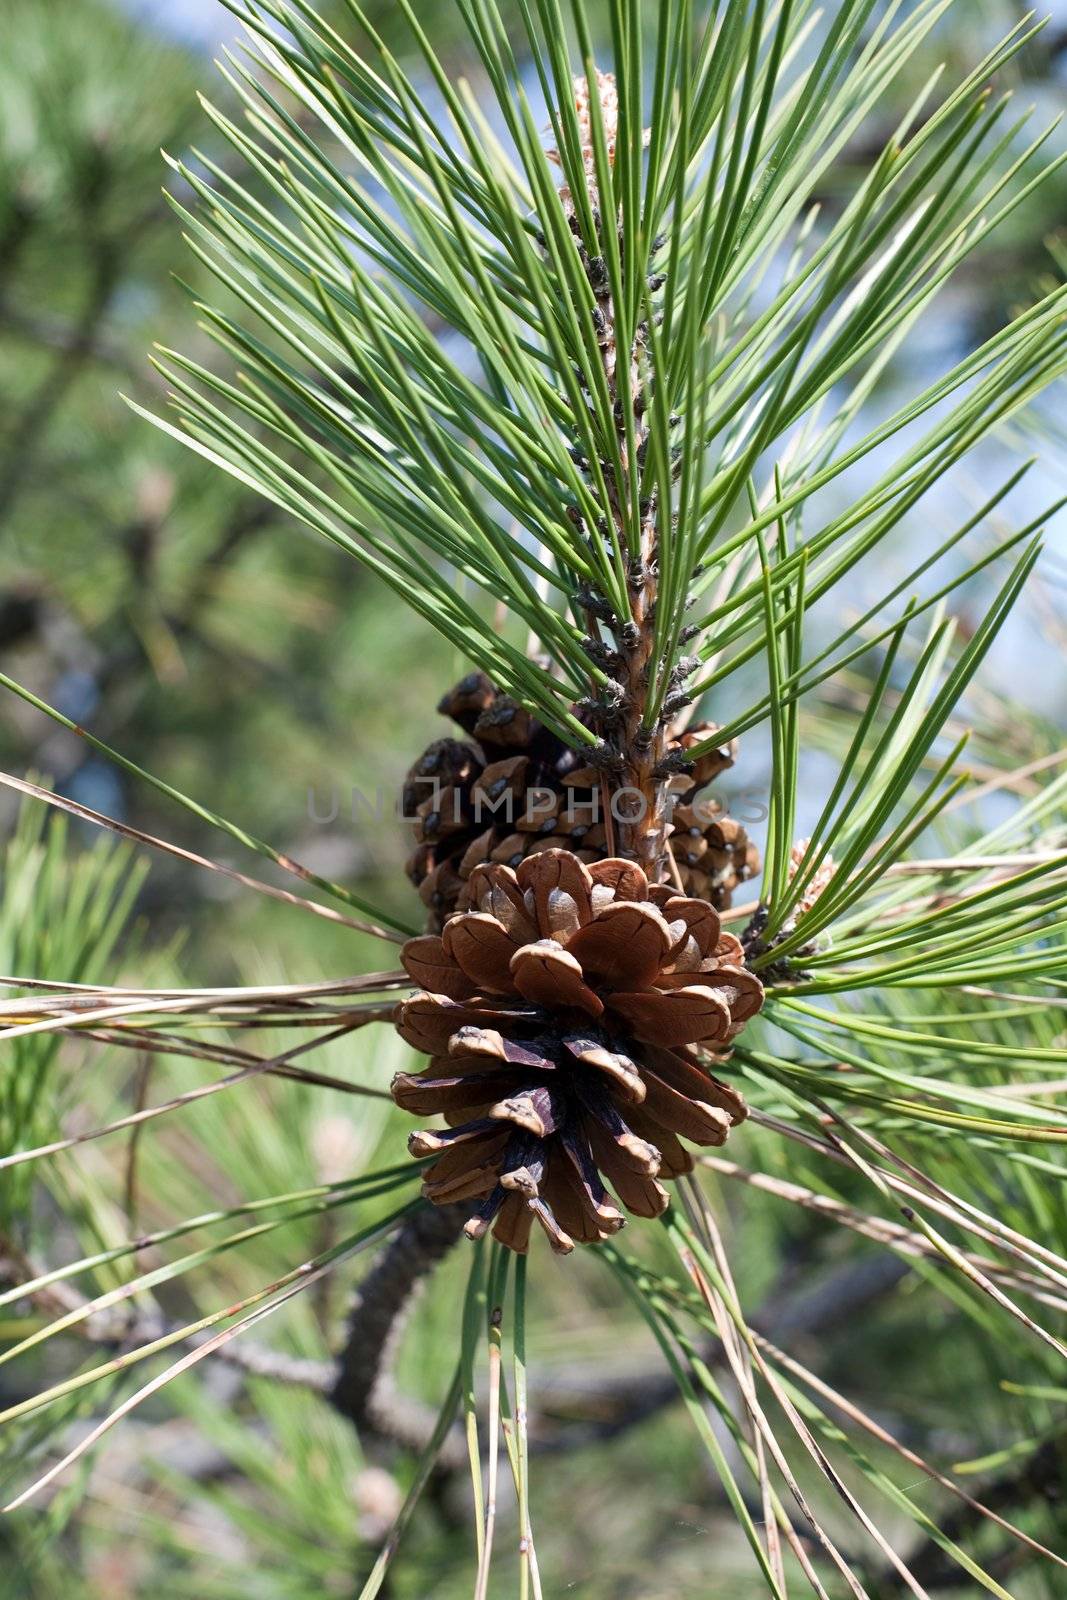 An image of a cone of green pine